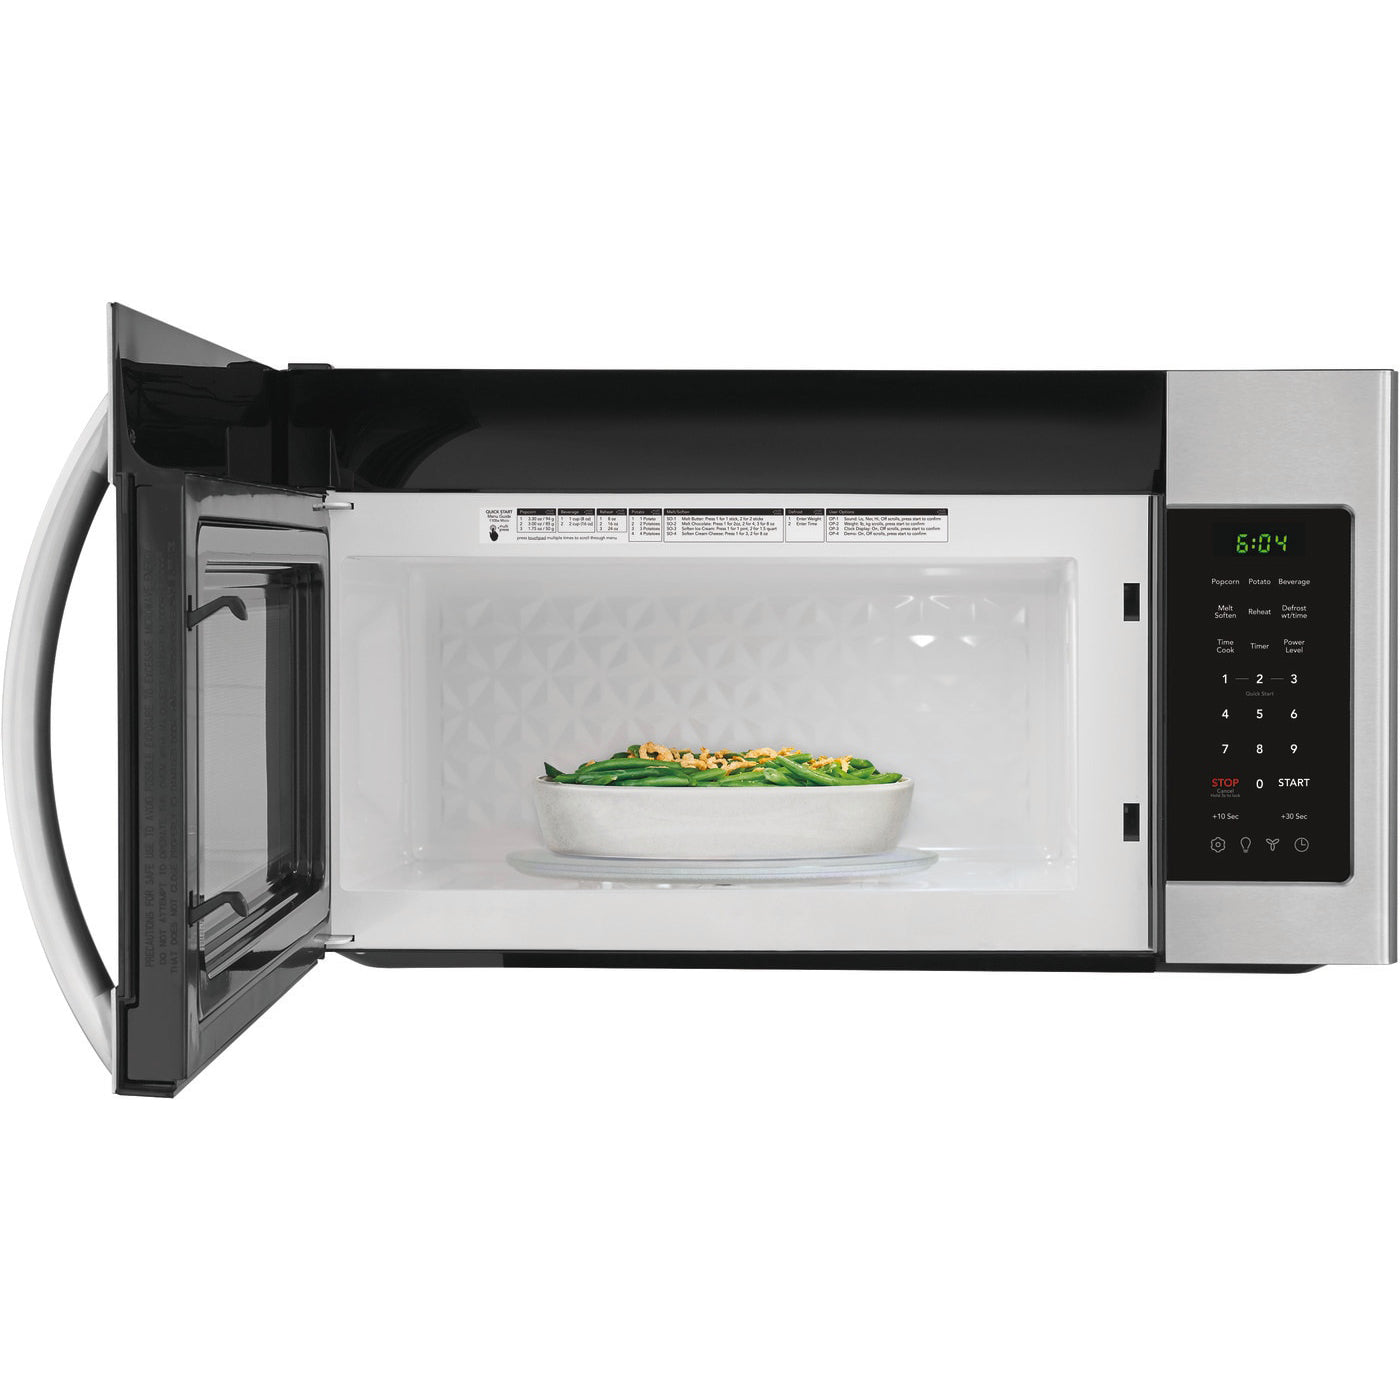 Frigidaire 1.8 Cu. Ft. 1,000 Watt Over-The-Range Microwave Oven with Extra Large Cooking Space